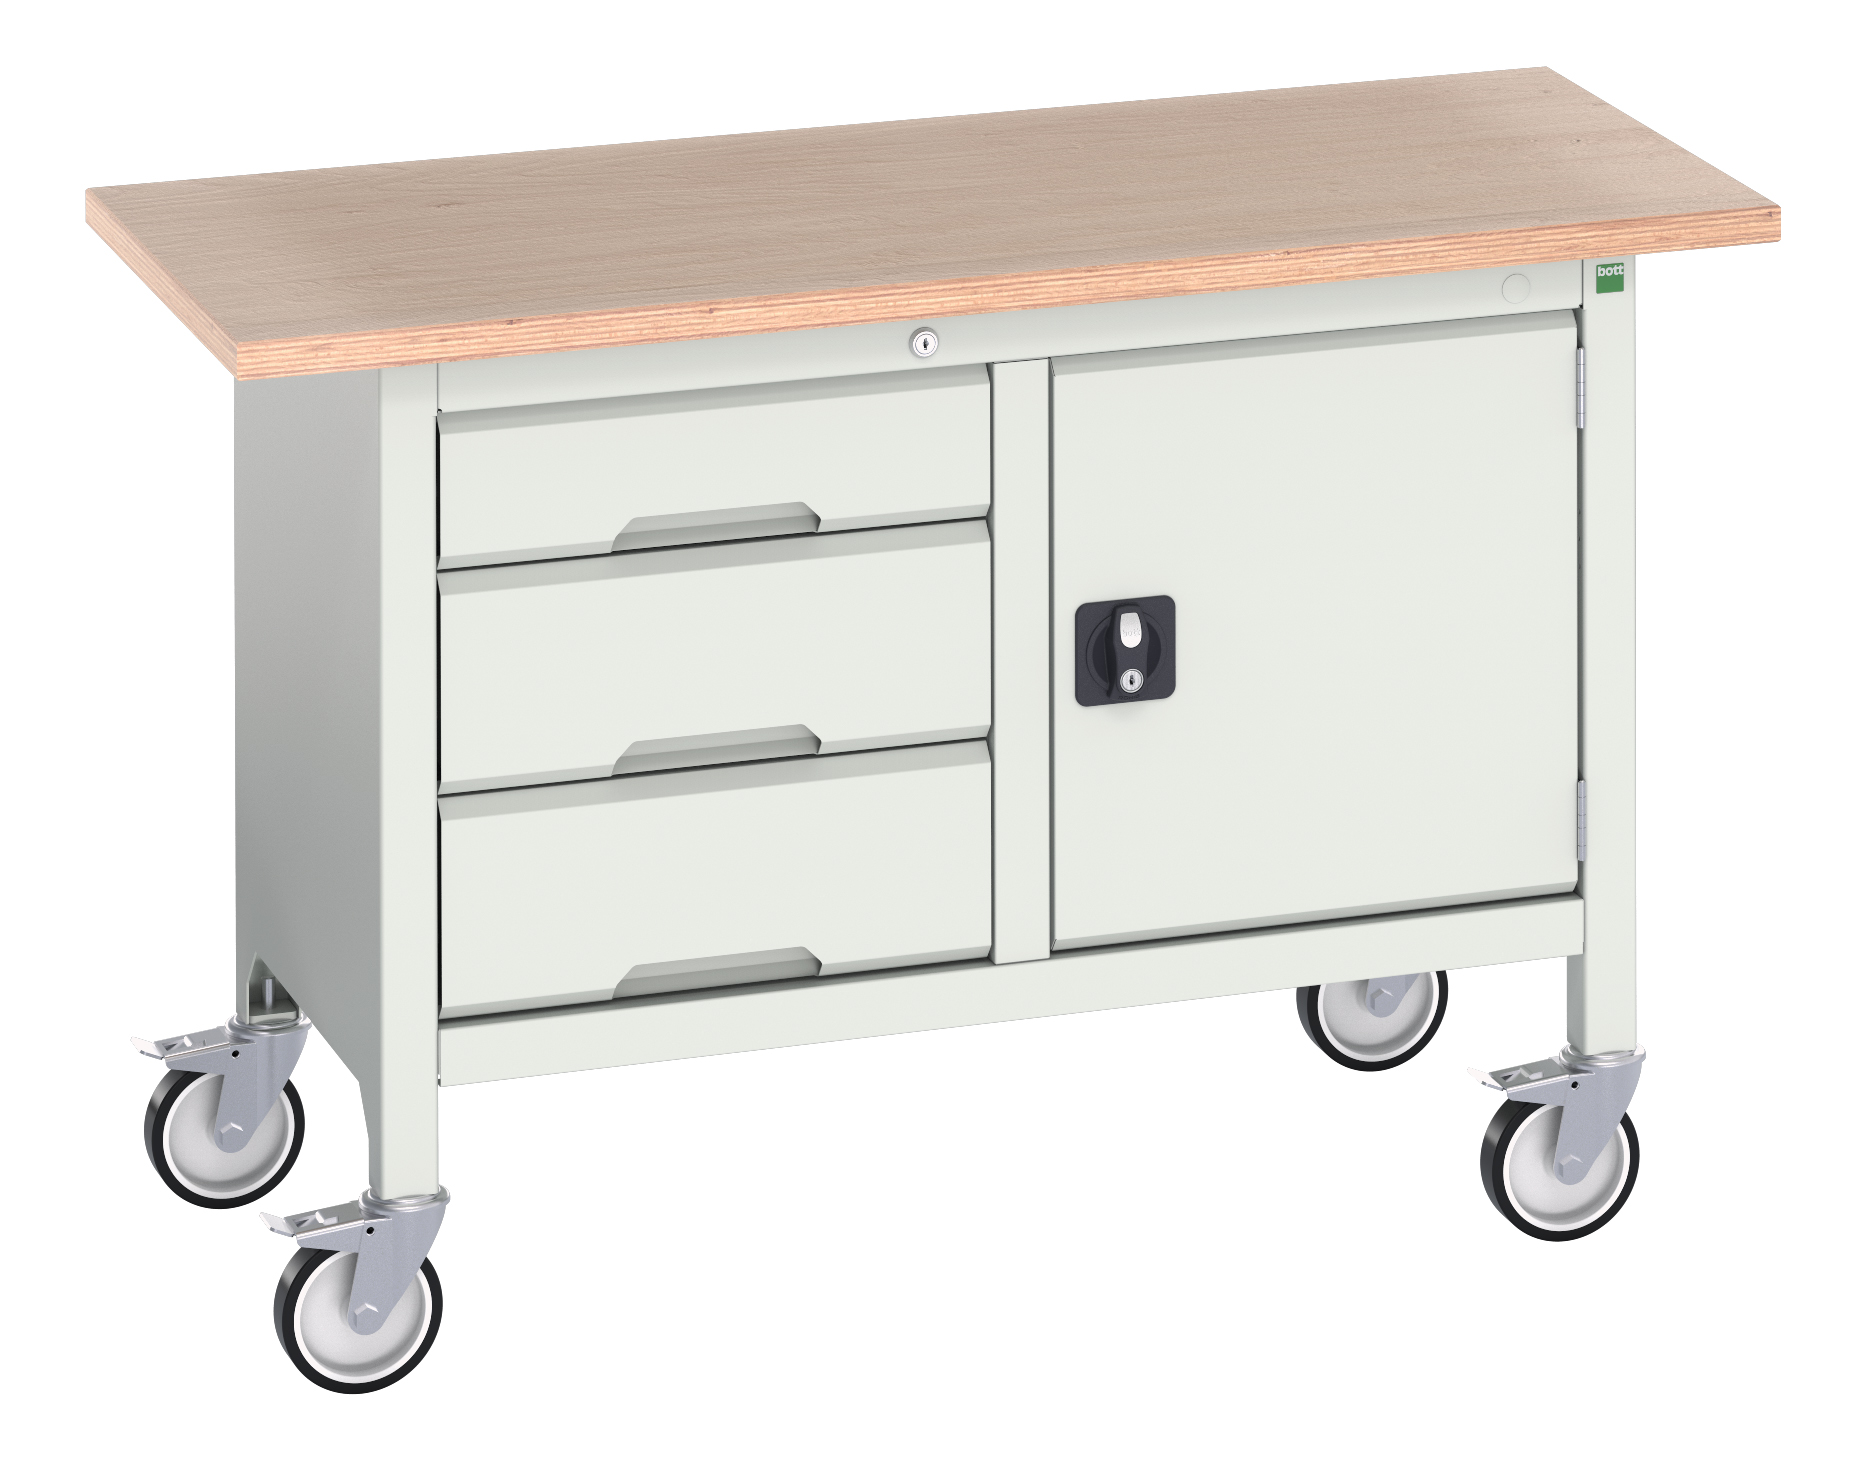 Bott Verso Mobile Storage Bench With 3 Drawer Cabinet / Full Cupboard - 16923203.16